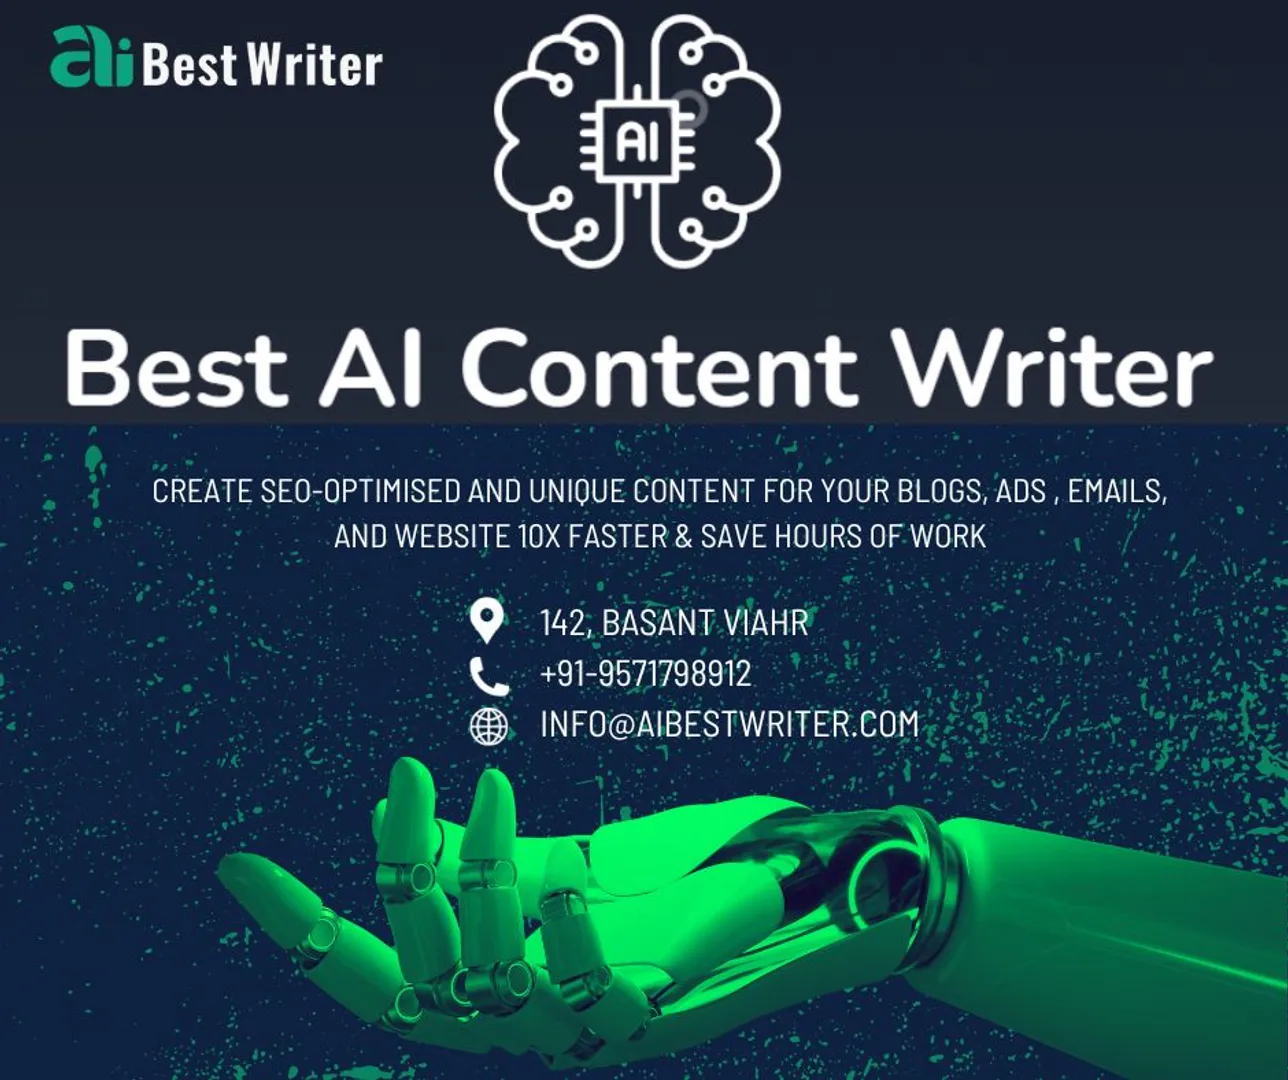 Best Ai Content Writer

Aibestwriter is the ultimate choice for those seeking the best AI content writer. Our cutting-edge technology harnesses the power of artificial intelligence to craft high-quality, engaging content effortlessly. Say goodbye to writer's block and hello to seamless content creation with Aibestwriter – your trusted partner for exceptional, AI-driven content generation. Elevate your brand with the best AI content writer in town!

https://aibestwriter.com/